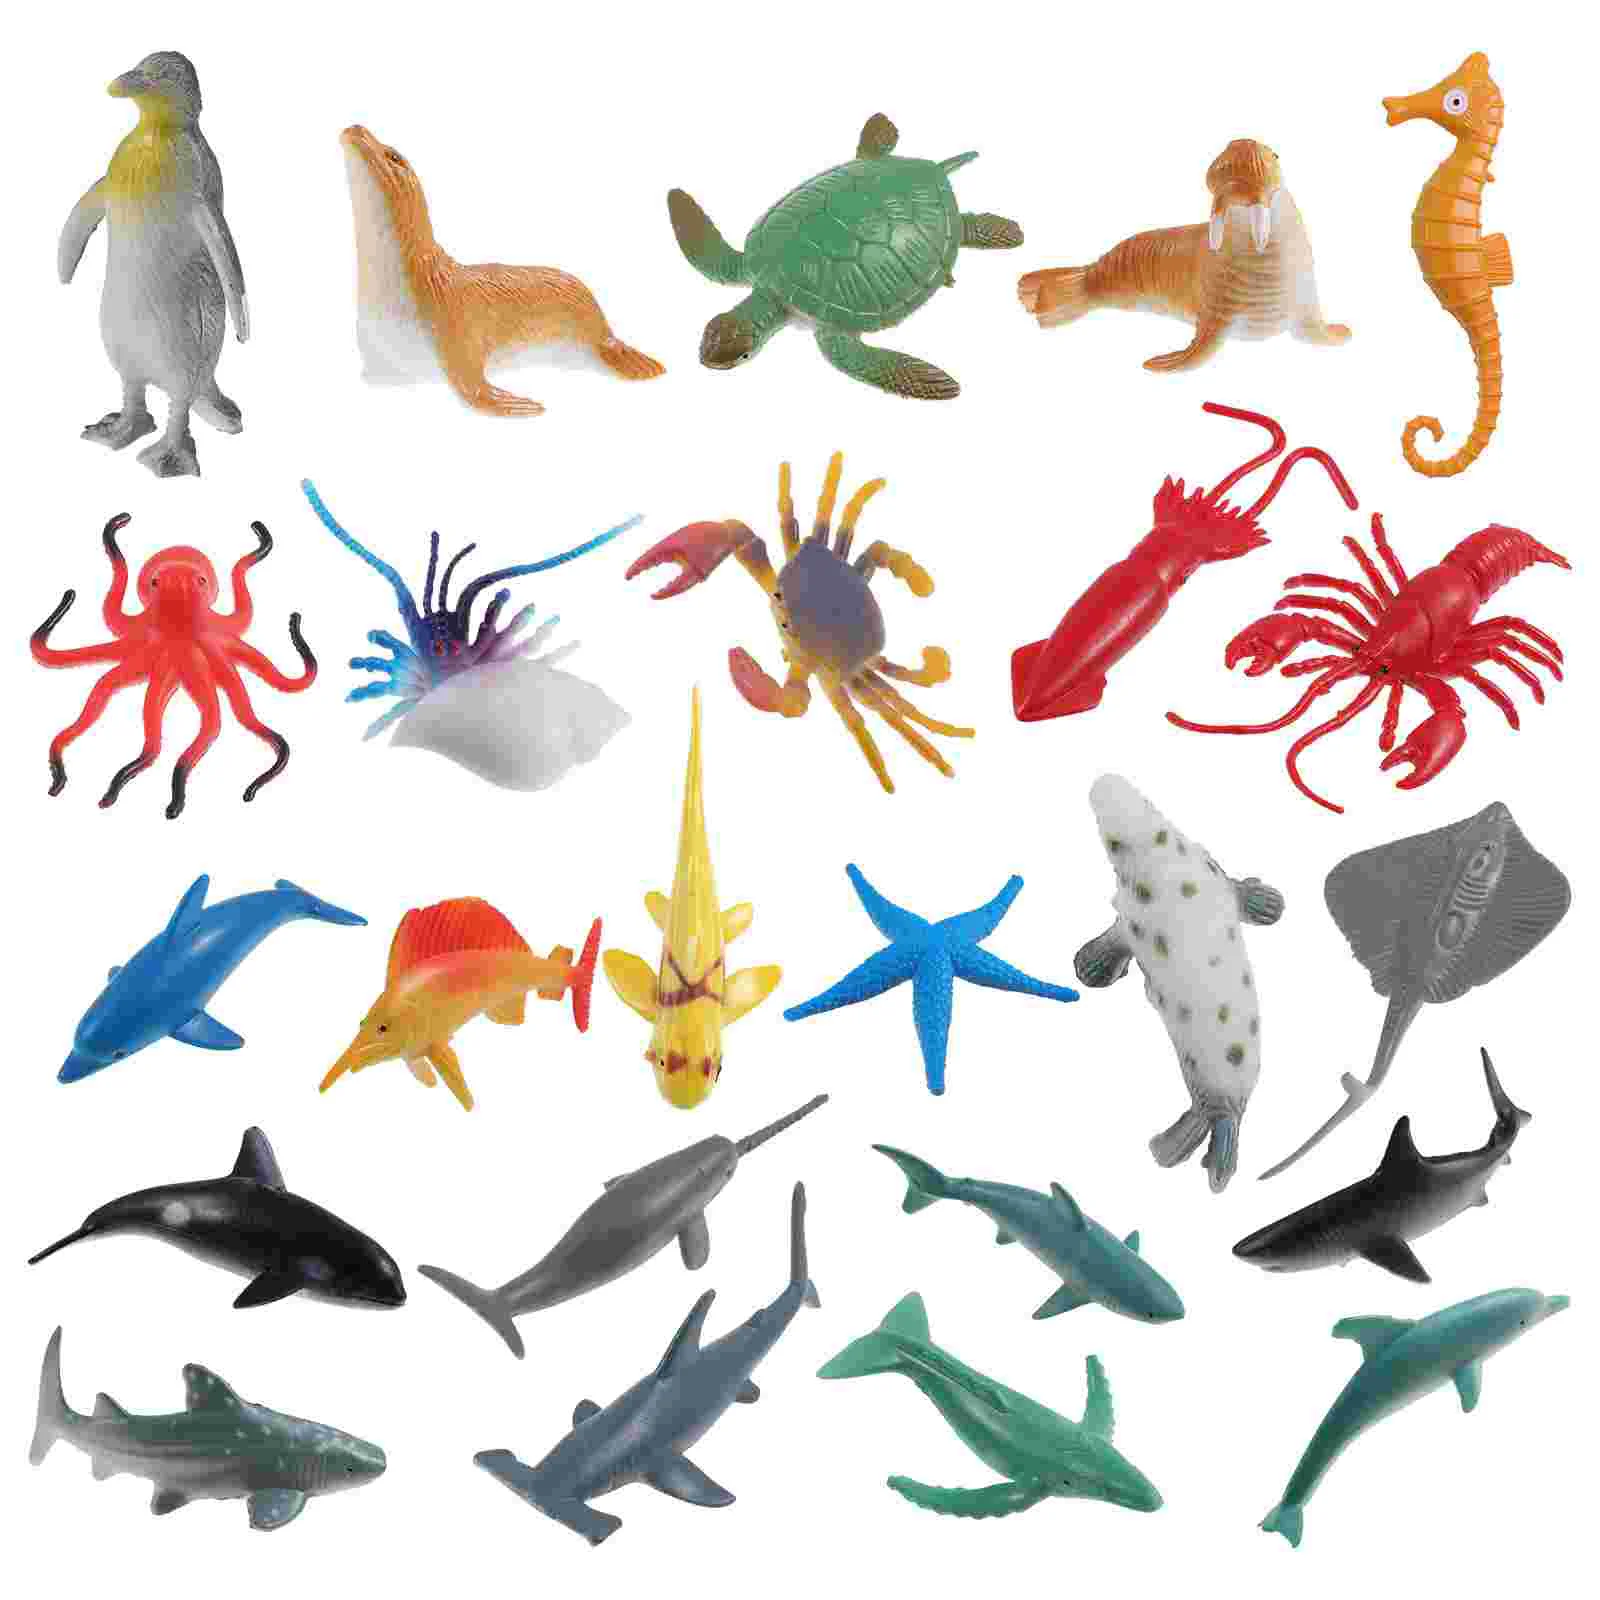 

Sea Animal Toys Figures Ocean Creatures Animals Kids Figurines Turtle Decorations Stuffers Stocking Christmas Dolphin Party The